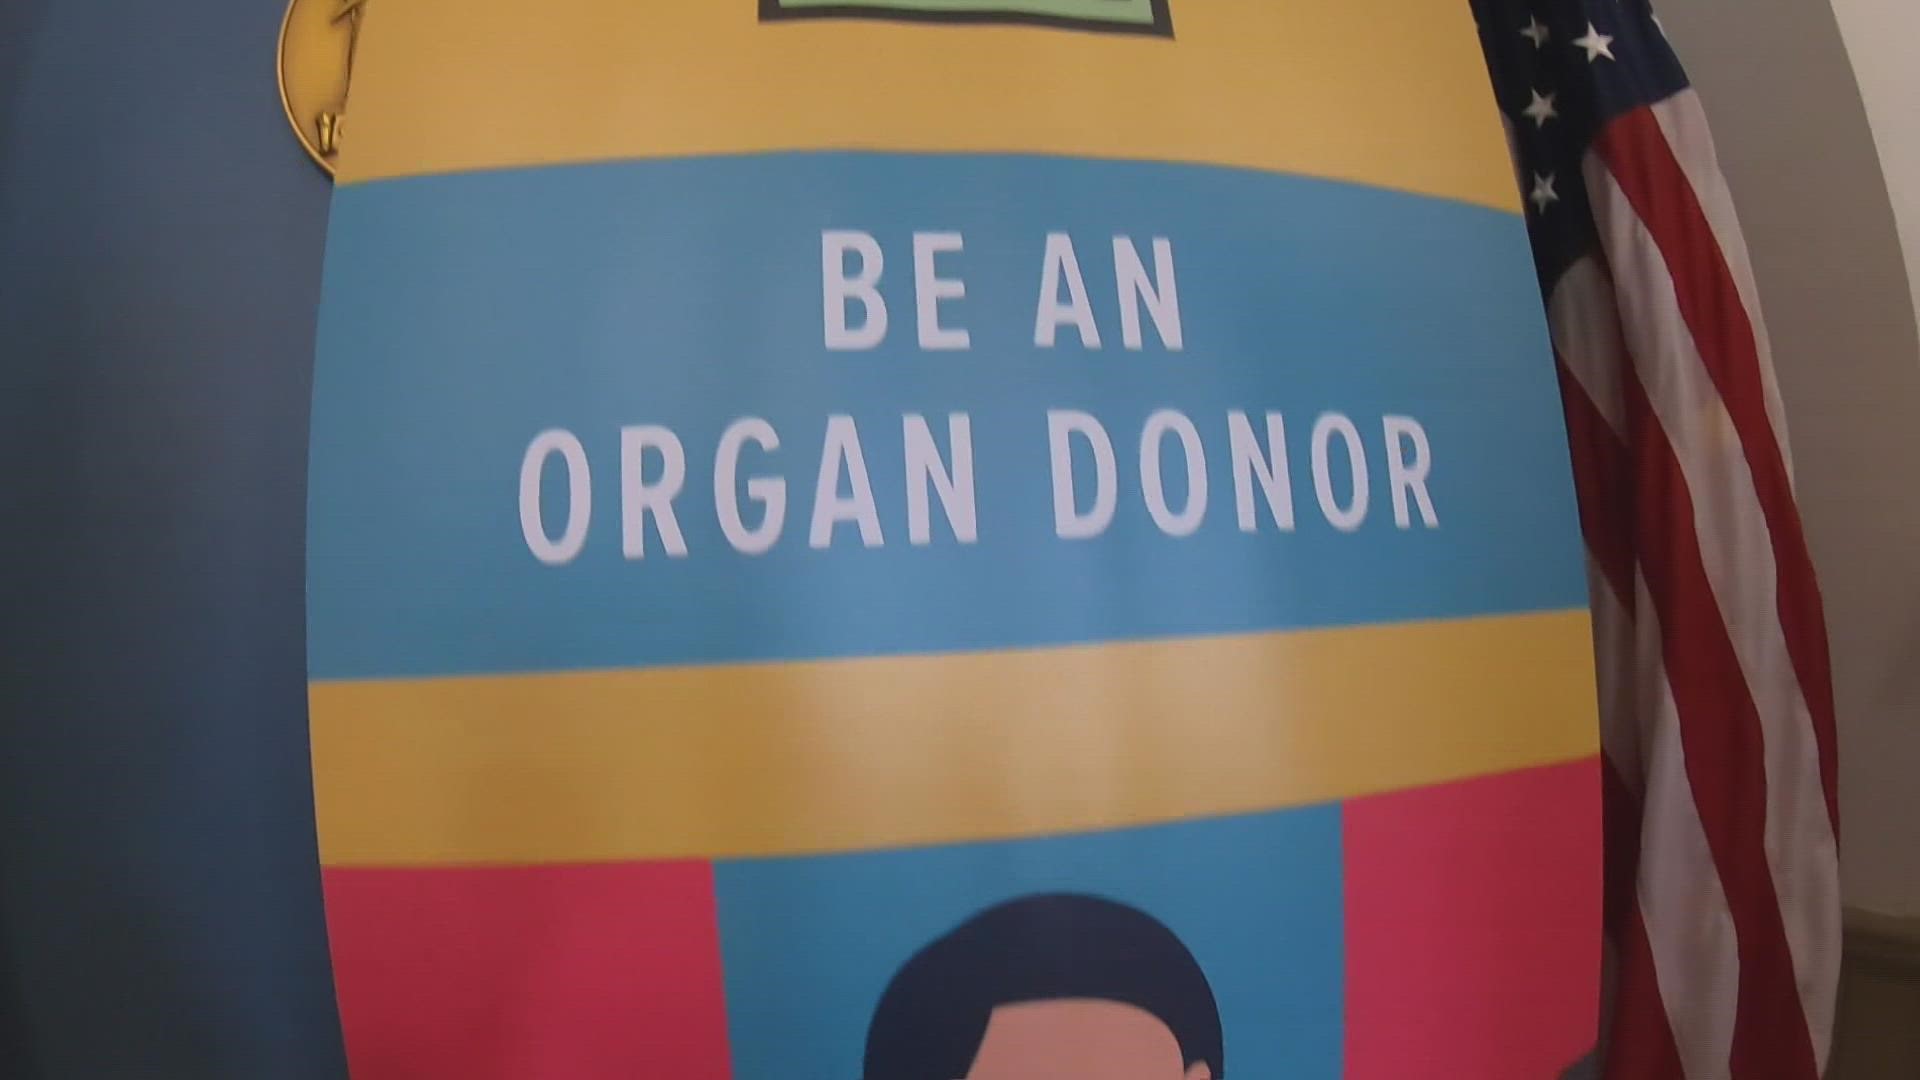 Maine has more registered organ donors than any other New England state, according to the New England Donor Service. Mainer Chad O'Malley needs one.